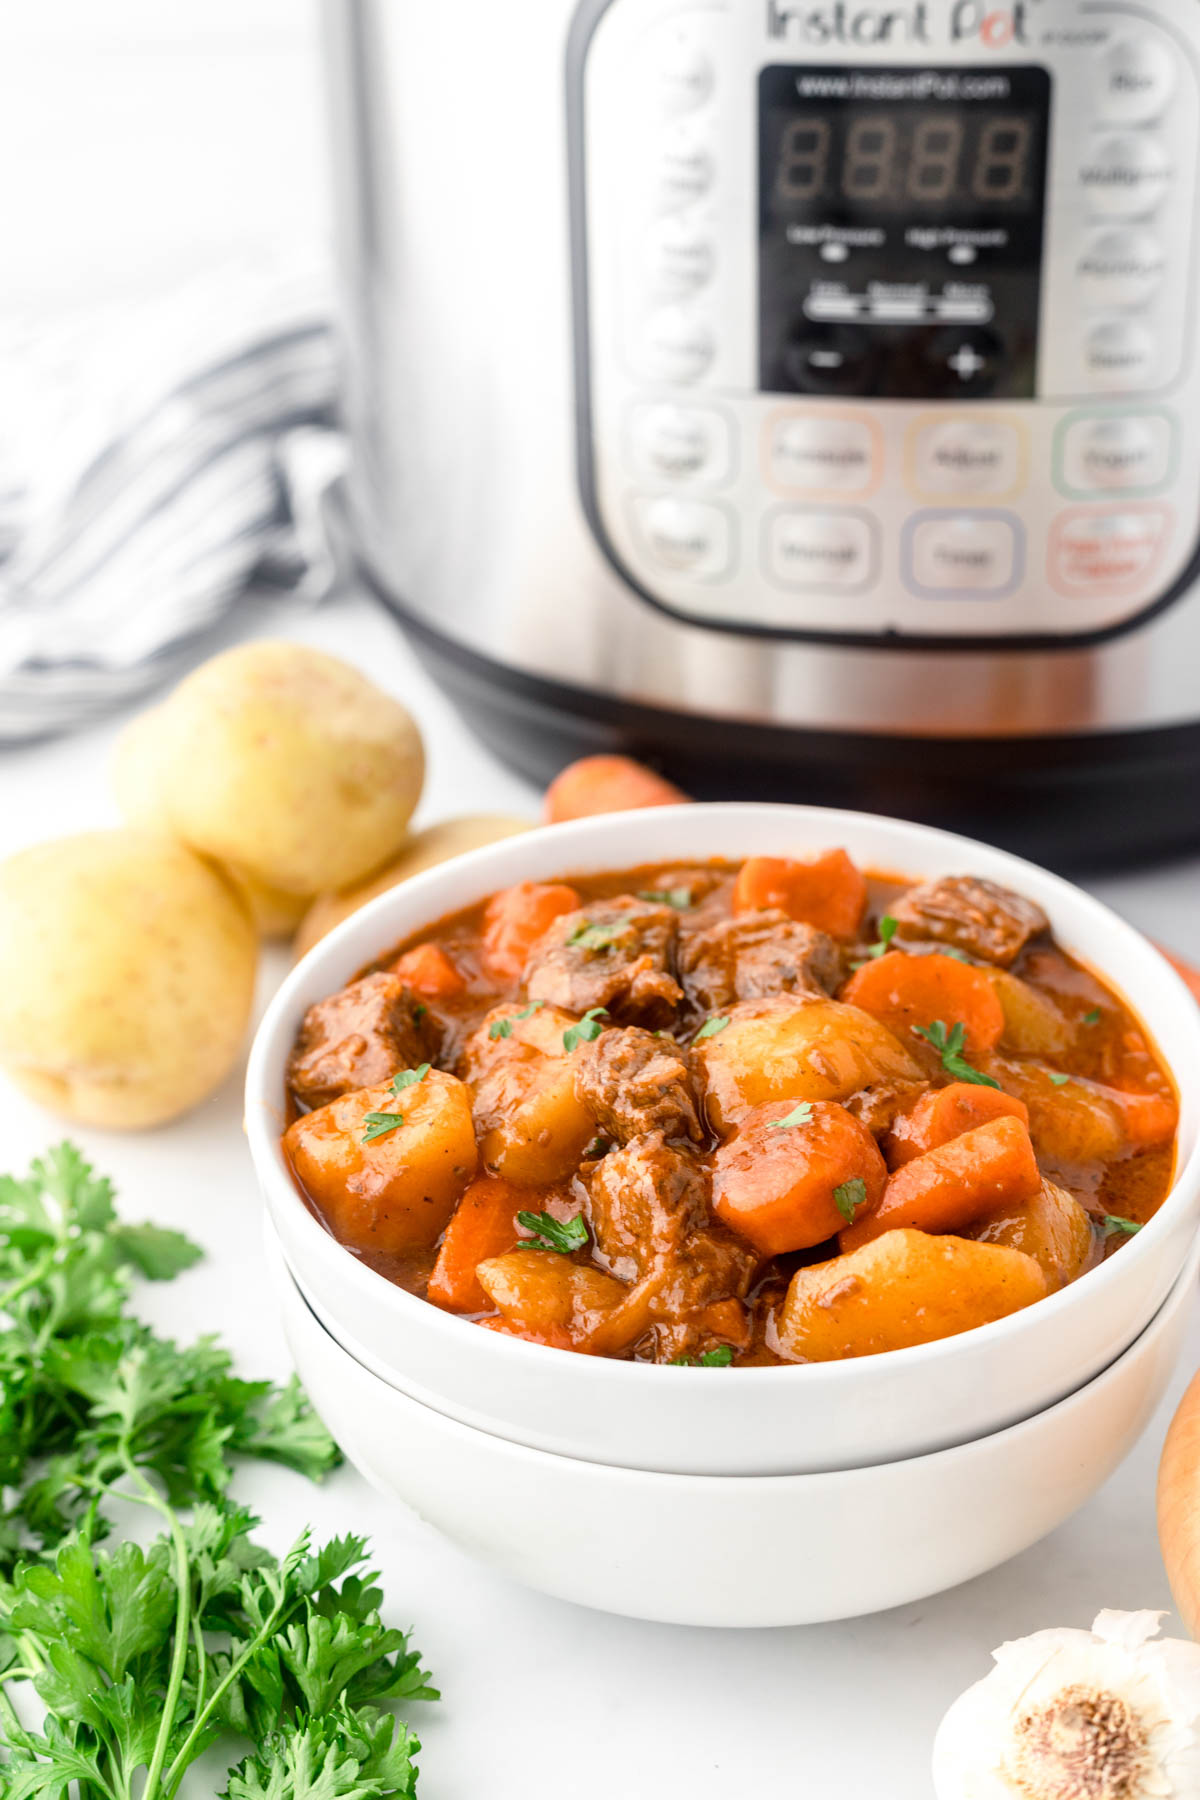 Cooked beef stew is displayed in a white bowl in the foreground. Behind it, an Instant Pot and vegetables are visible.